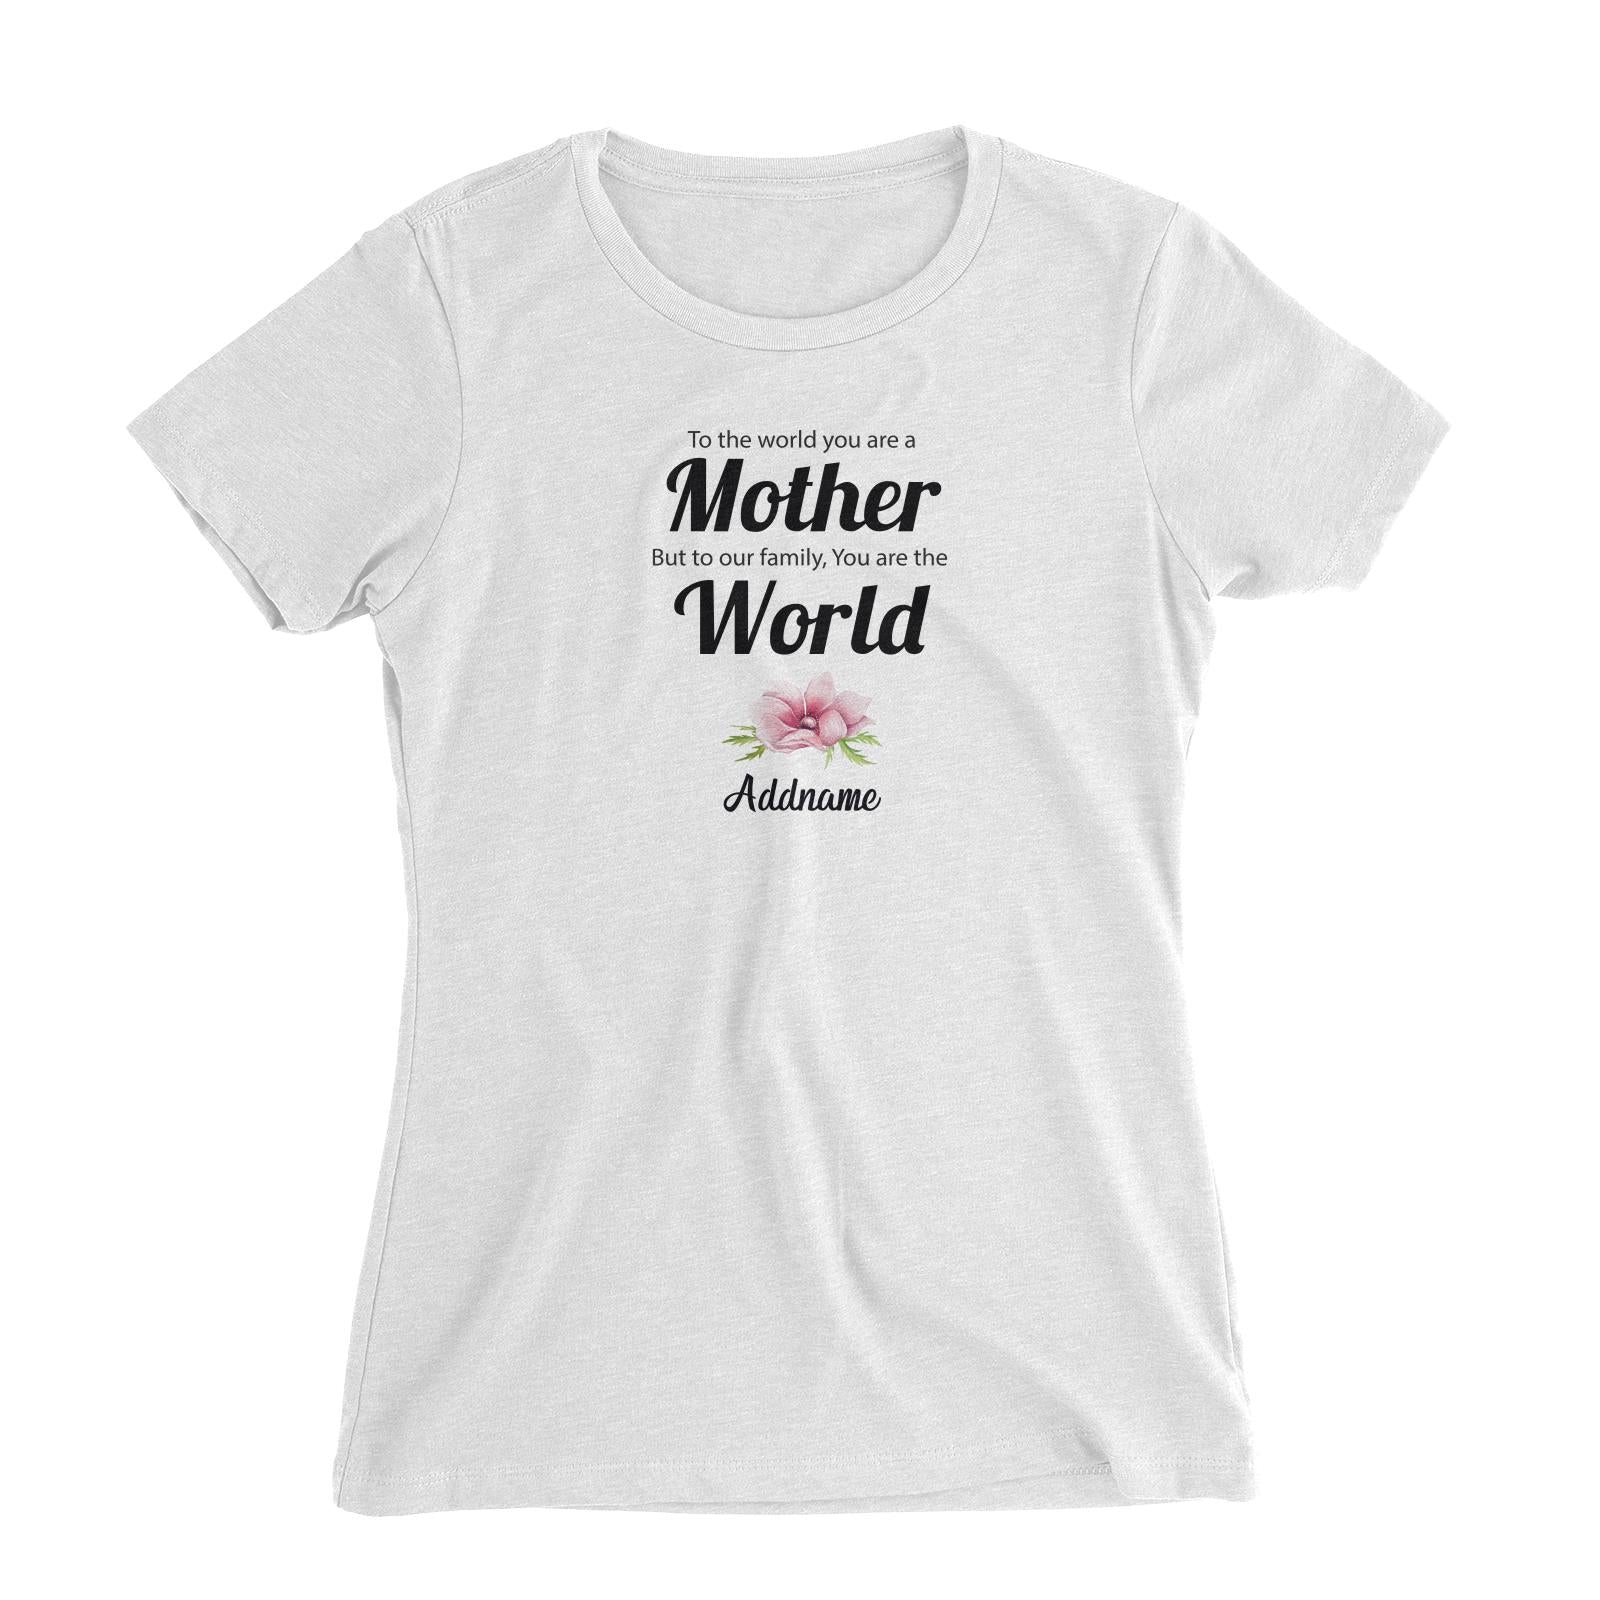 Sweet Mom Quotes 1 To The World You Are A Mother But To Our Family, You Are The World Addname Women's Slim Fit T-Shirt